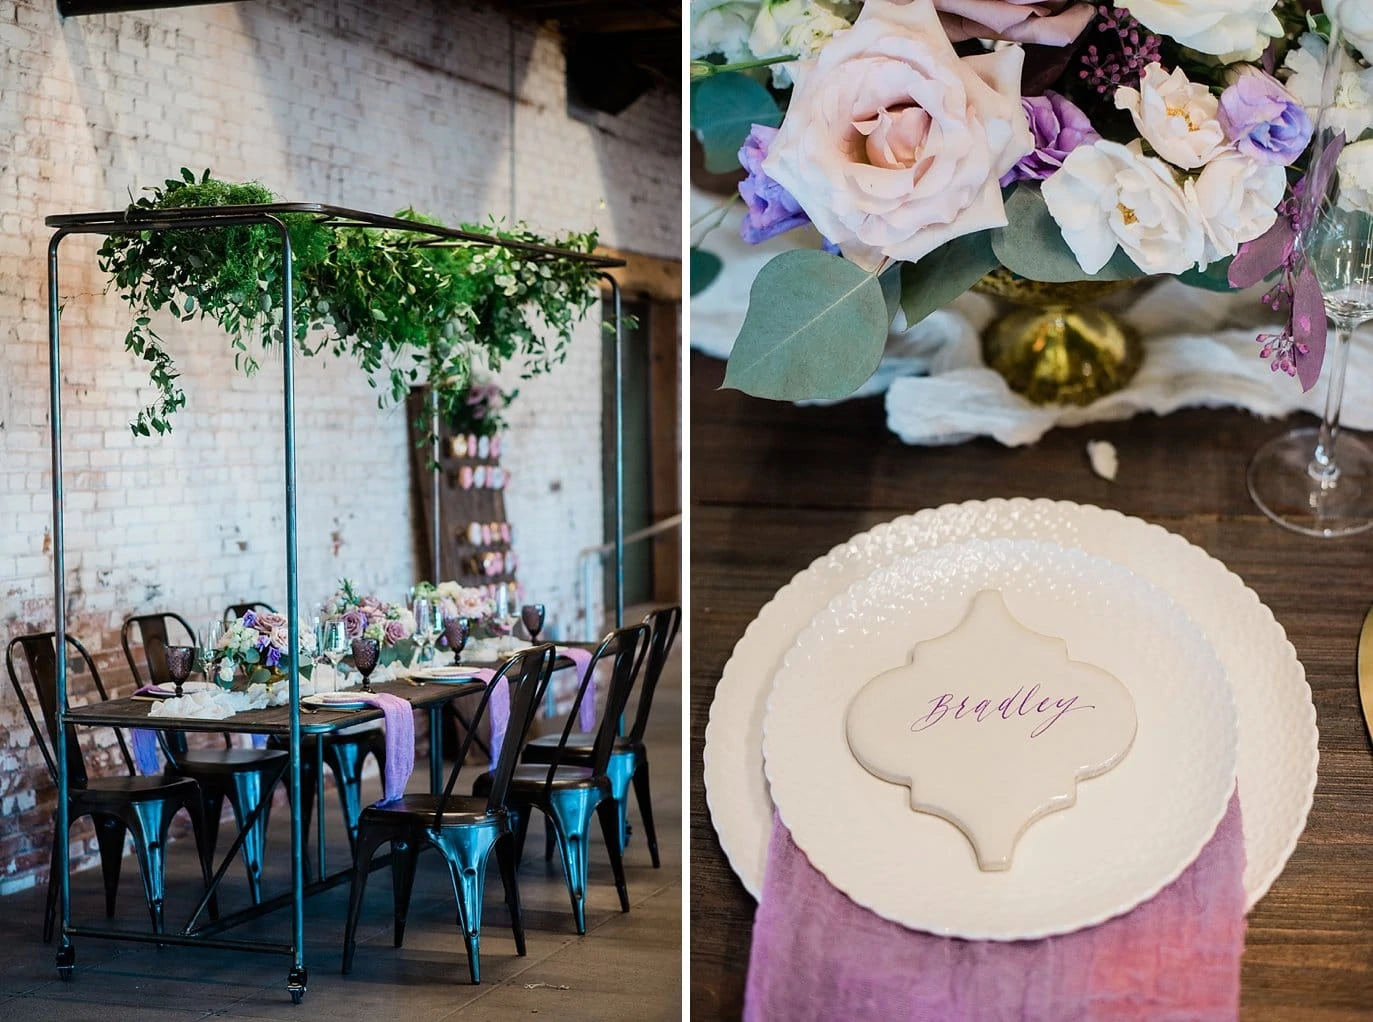 antique metal head table with hanging greenery and metal chairs at Shyft Denver wedding by Lyons wedding photographer Jennie Crate